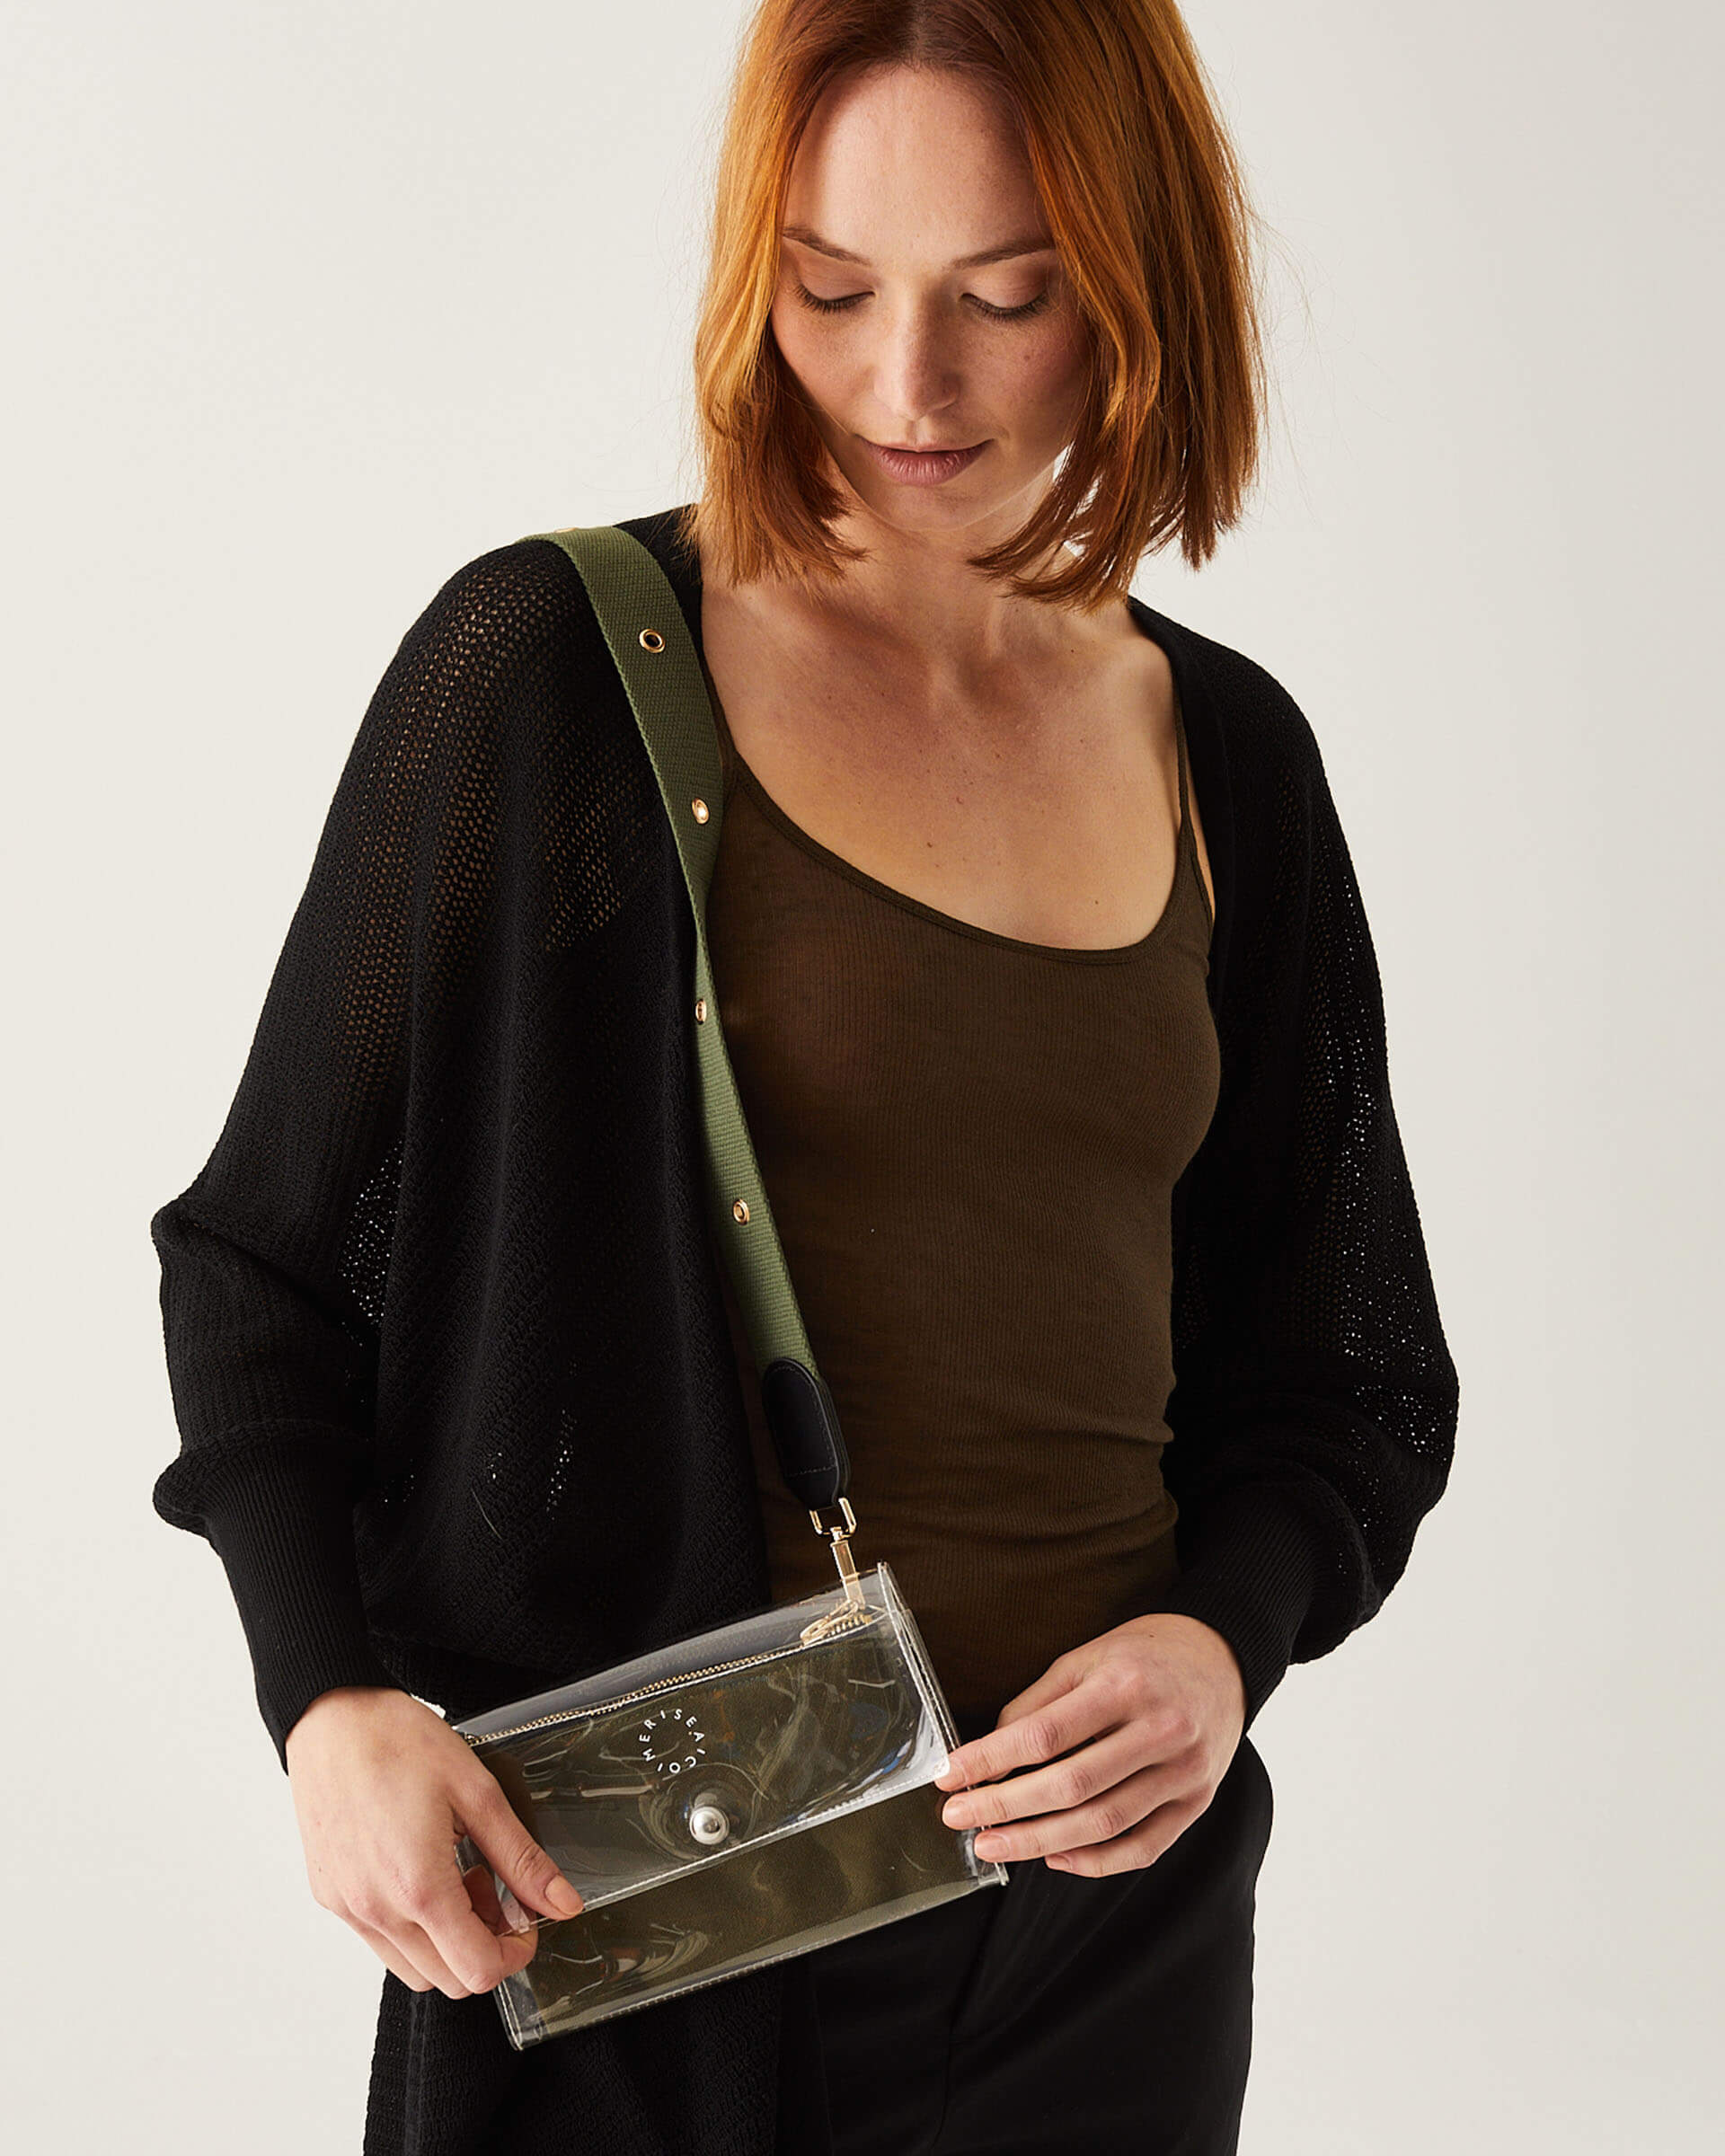 Female wearing black duster with crossbody clear bag over a shoulder with a green strap